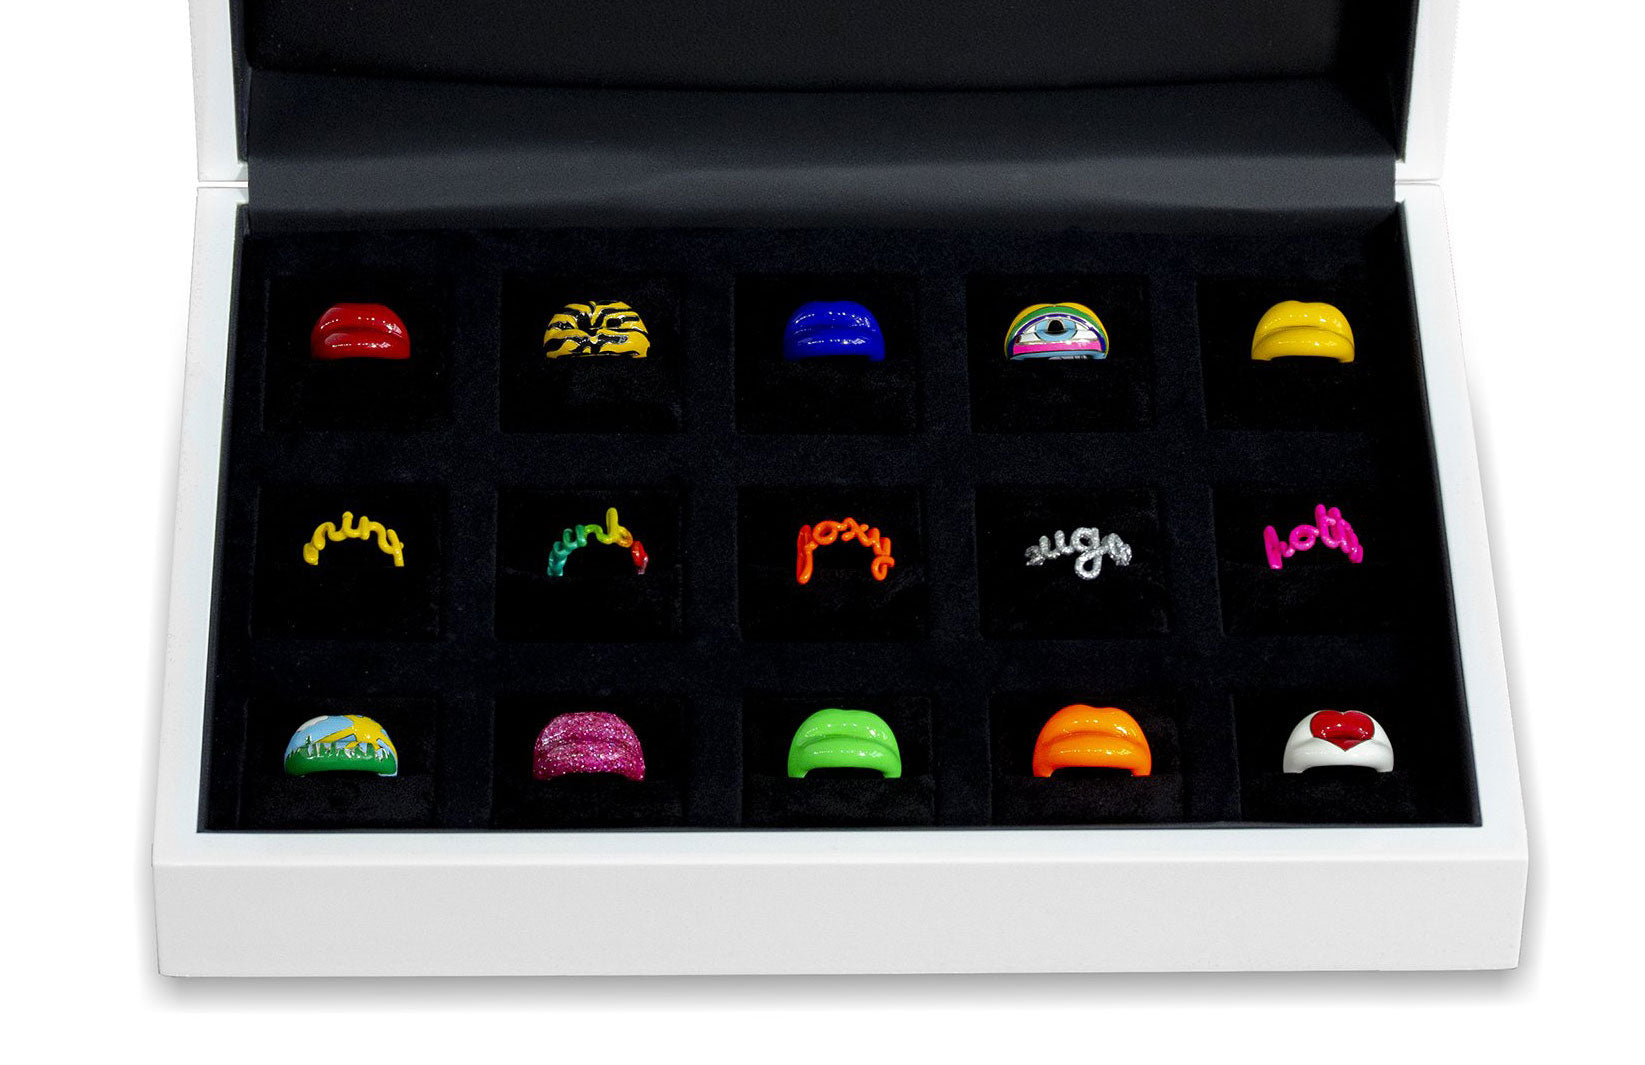 White display box of Hotlips and Hotscripts by Solange rings